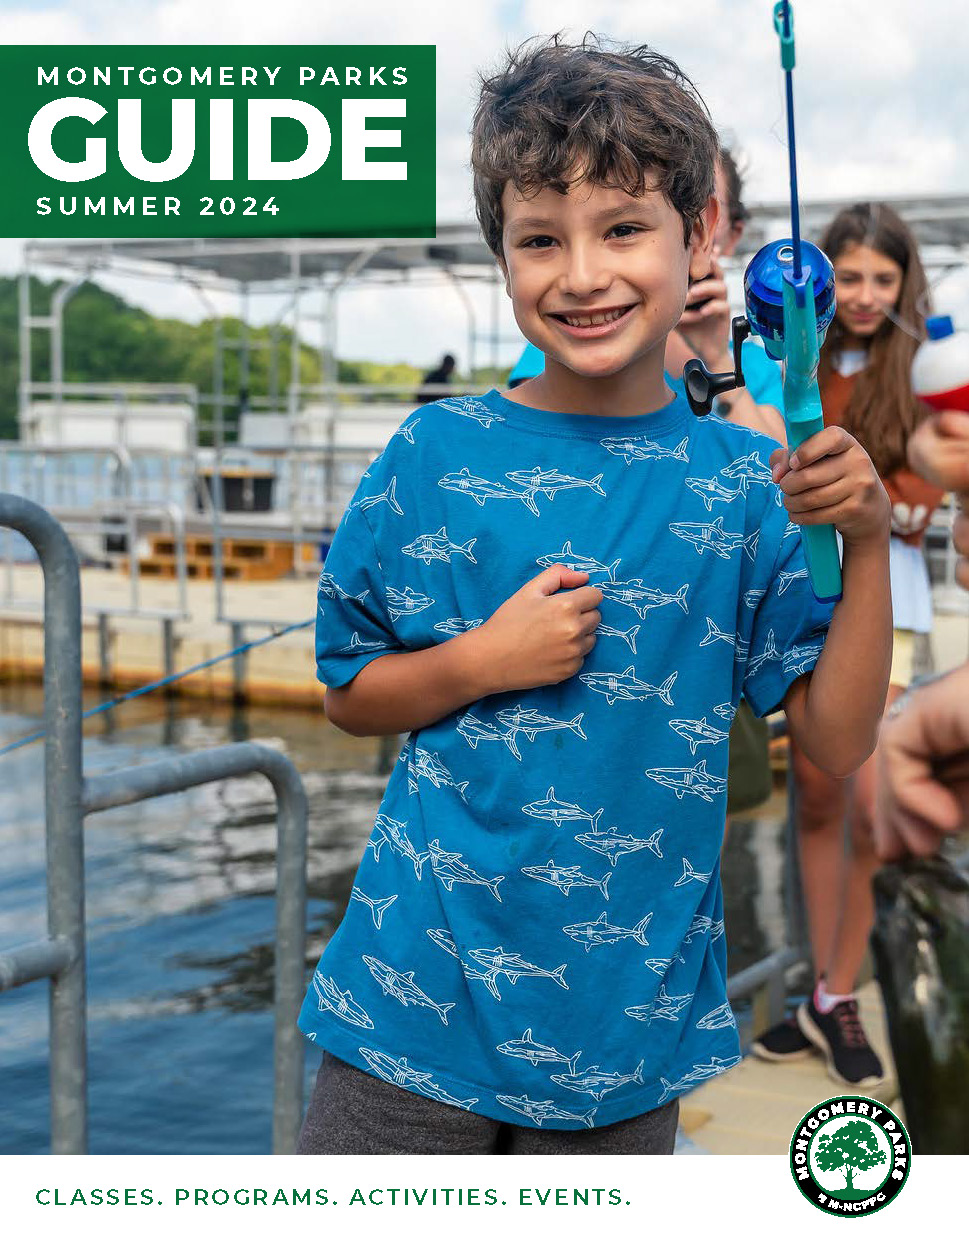 Youth smiling while holding a blue fishing rod. Text reads Montgomery Parks Guide Summer 2024